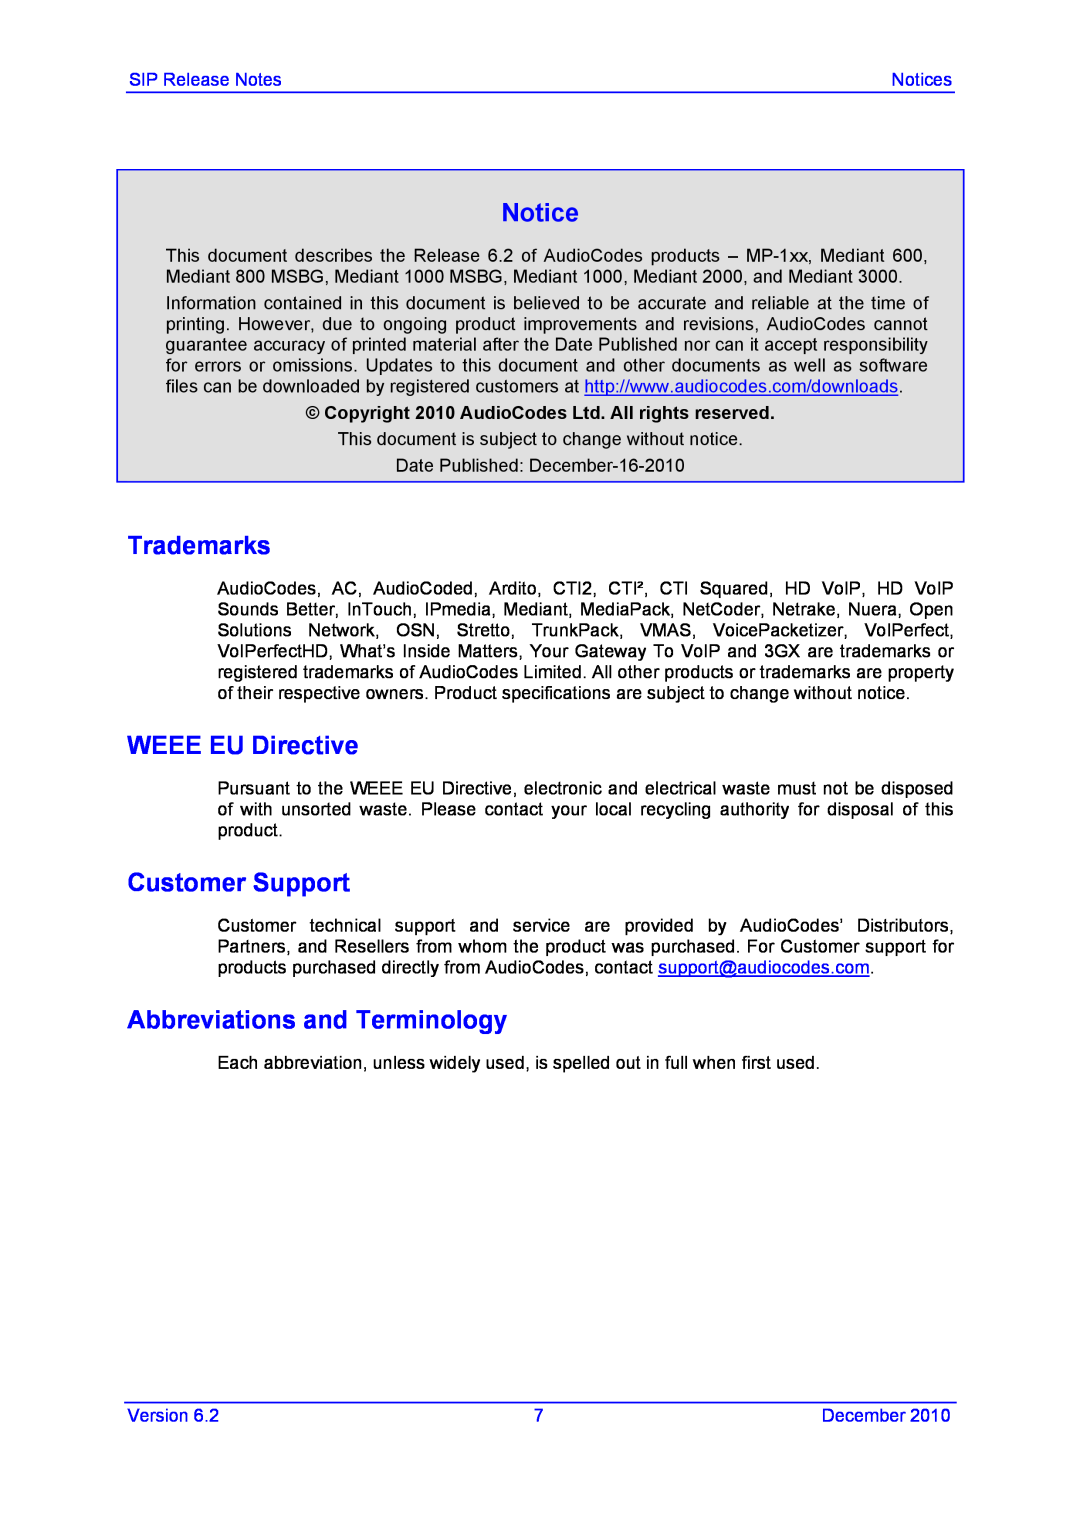 AudioControl VERSION 6.2 manual Trademarks, WEEE EU Directive, Customer Support, Abbreviations and Terminology 